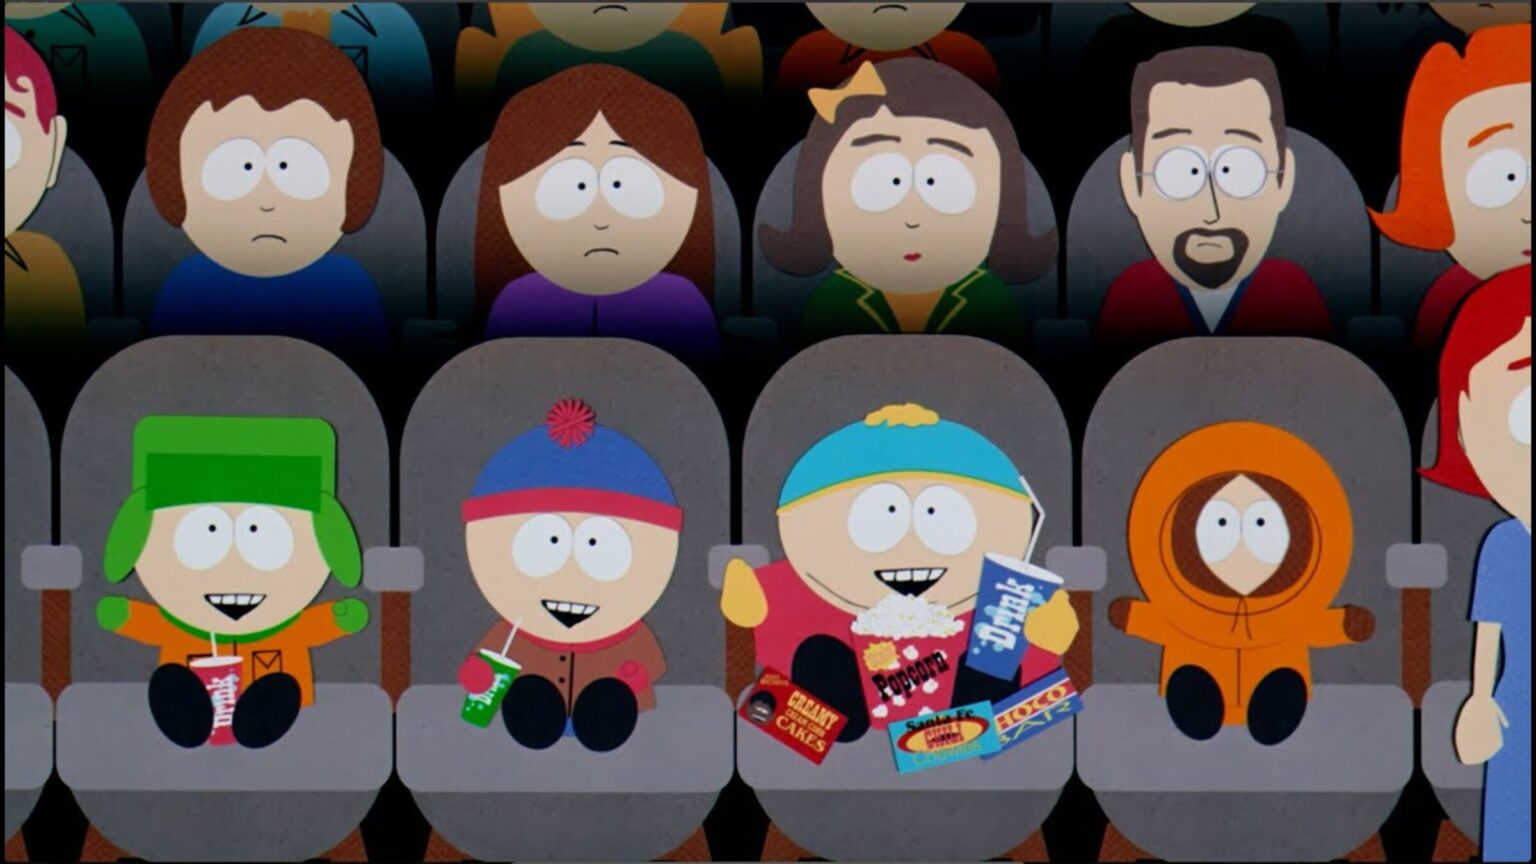 'South Park' has been sleeping but it's coming back, blooming hard! The show will not be leaving anytime soon. Find out the very latest details!